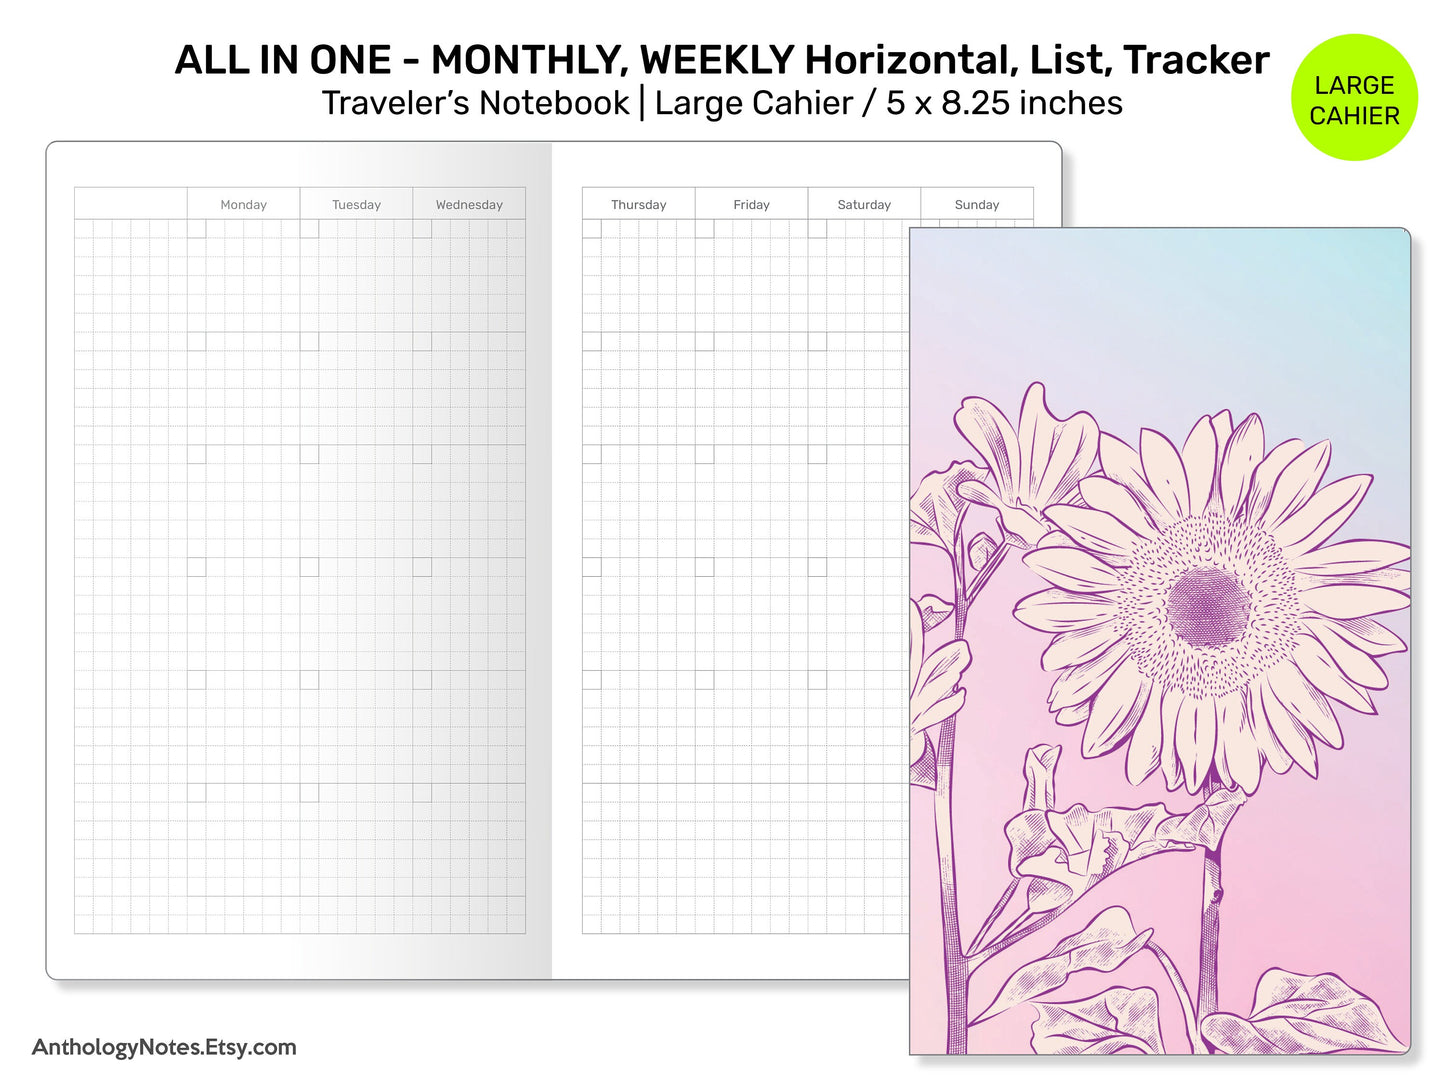 CAHIER TN All-in-ONE Insert, Monthly, Weekly Horizontal, List, Tracker, Notes Printable Traveler's Notebook Insert CH22-001